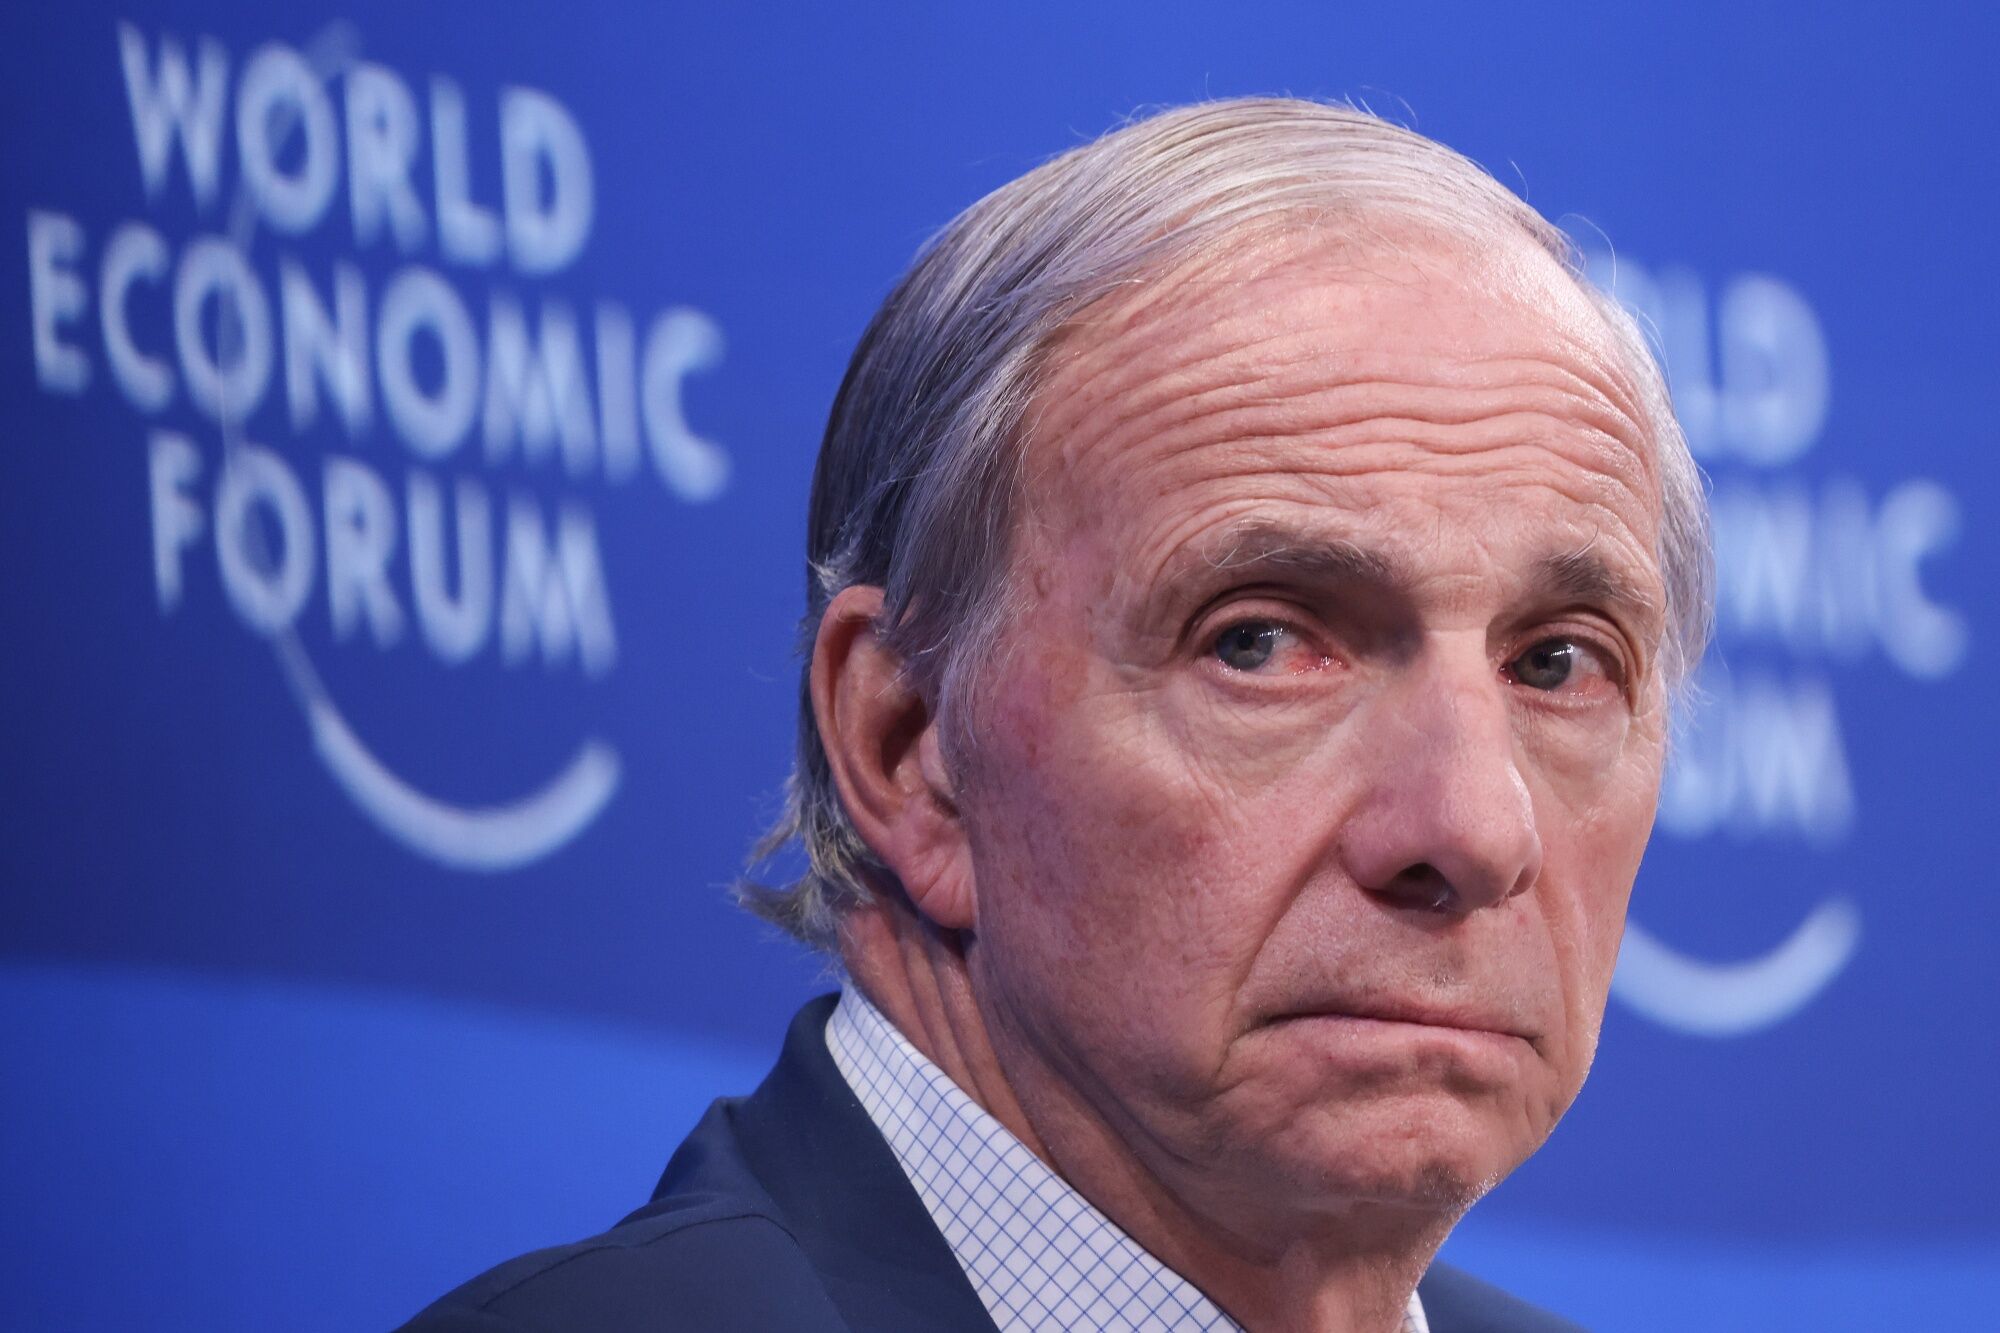 how to, dalio says china must fix debt problems or face ‘lost decade’